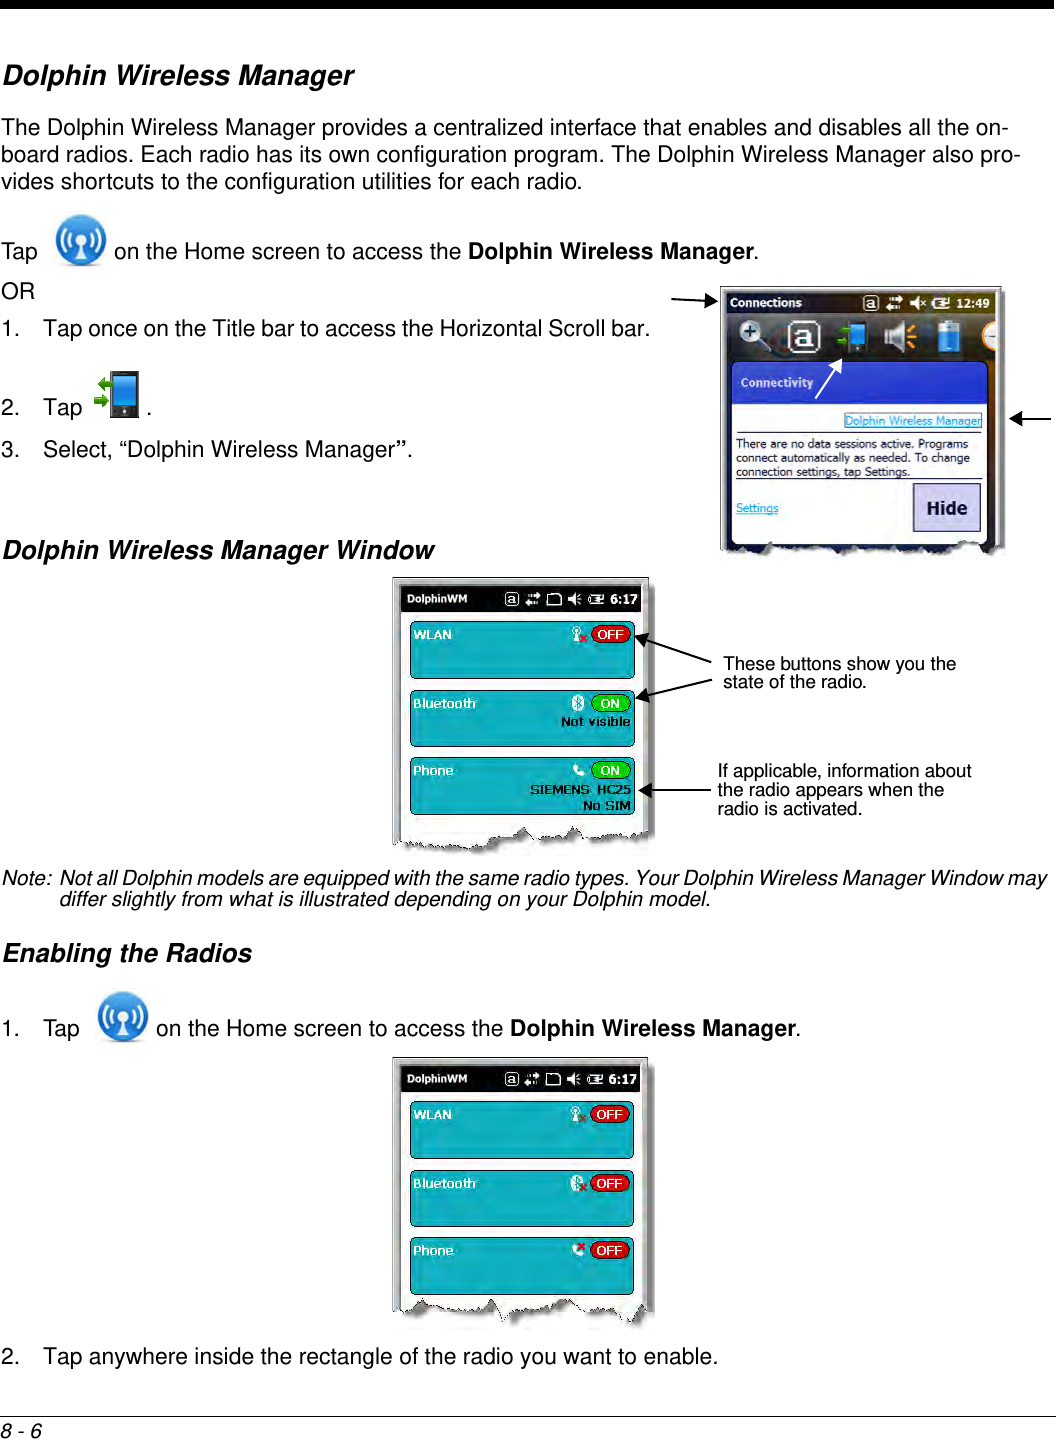 8 - 6Dolphin Wireless ManagerThe Dolphin Wireless Manager provides a centralized interface that enables and disables all the on-board radios. Each radio has its own configuration program. The Dolphin Wireless Manager also pro-vides shortcuts to the configuration utilities for each radio. Tap   on the Home screen to access the Dolphin Wireless Manager.OR 1. Tap once on the Title bar to access the Horizontal Scroll bar. 2. Tap . 3. Select, “Dolphin Wireless Manager”.Dolphin Wireless Manager WindowNote: Not all Dolphin models are equipped with the same radio types. Your Dolphin Wireless Manager Window may differ slightly from what is illustrated depending on your Dolphin model.Enabling the Radios1. Tap   on the Home screen to access the Dolphin Wireless Manager. 2. Tap anywhere inside the rectangle of the radio you want to enable.If applicable, information about the radio appears when the radio is activated.These buttons show you the state of the radio.